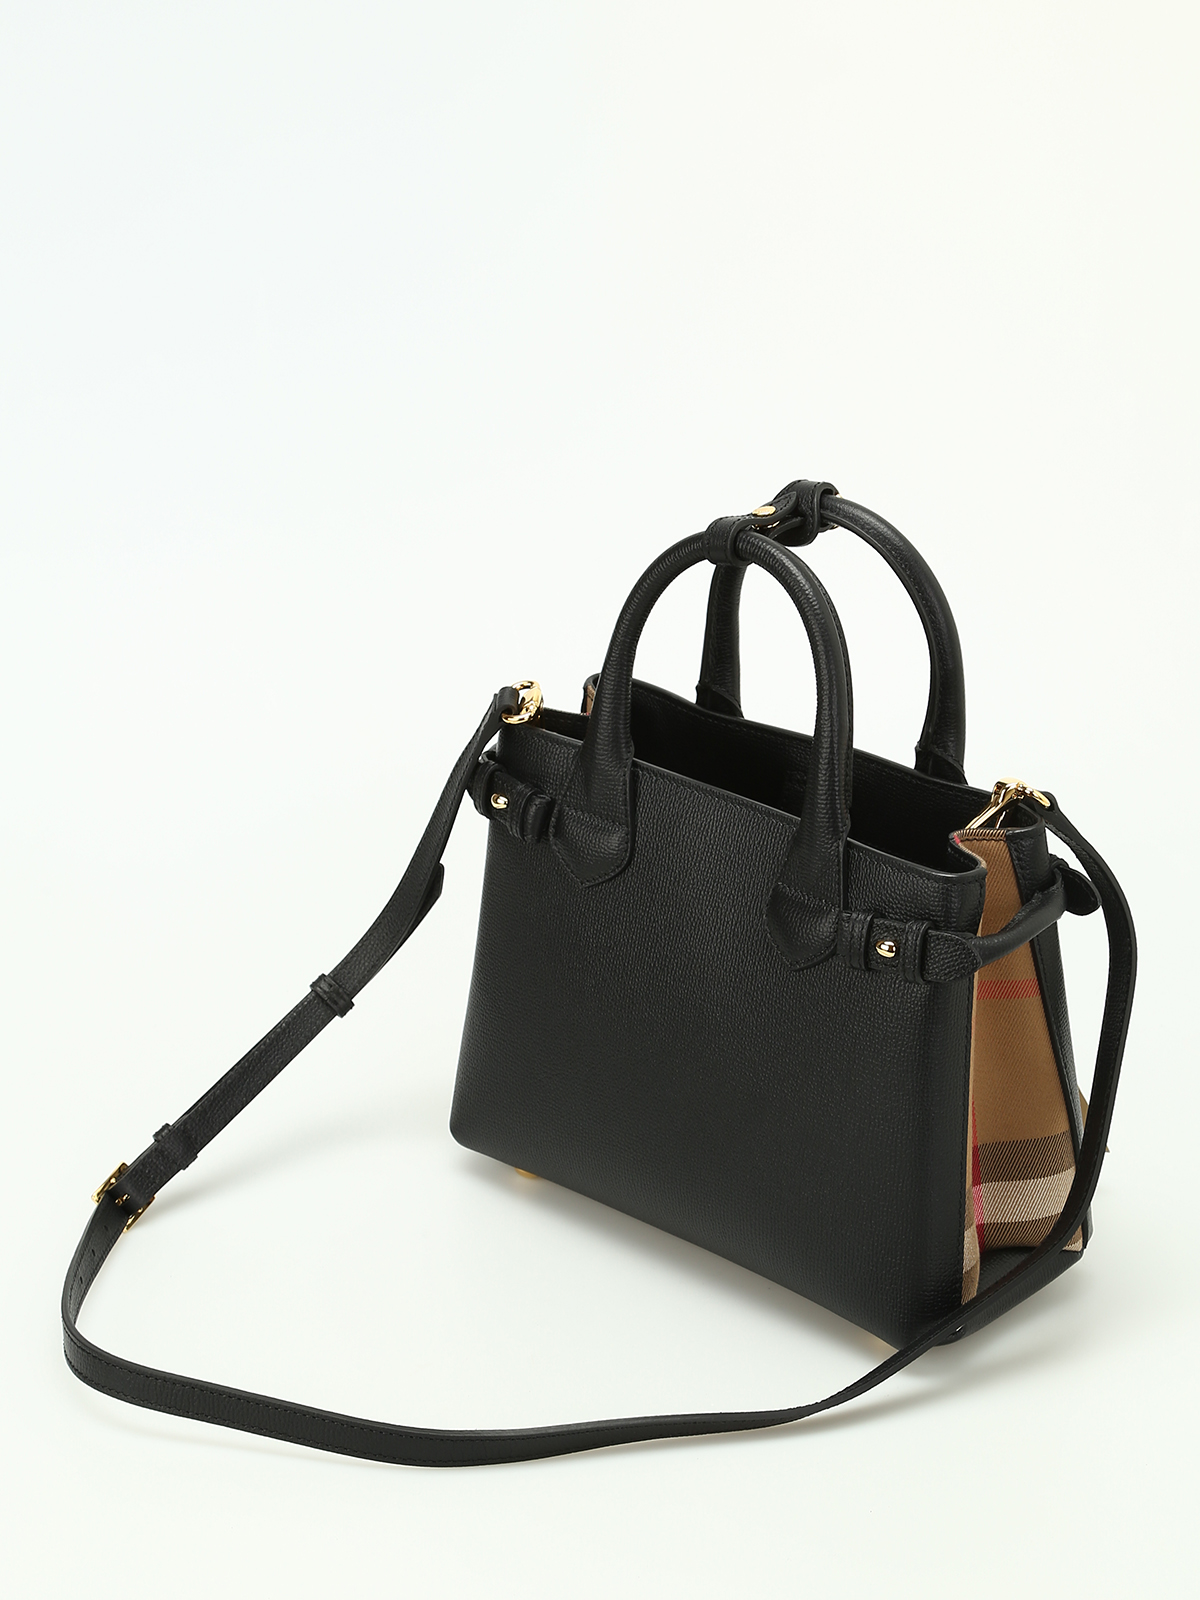 herder Arthur Jaar Totes bags Burberry - The Banner small leather bag - 4023700 | iKRIX.com